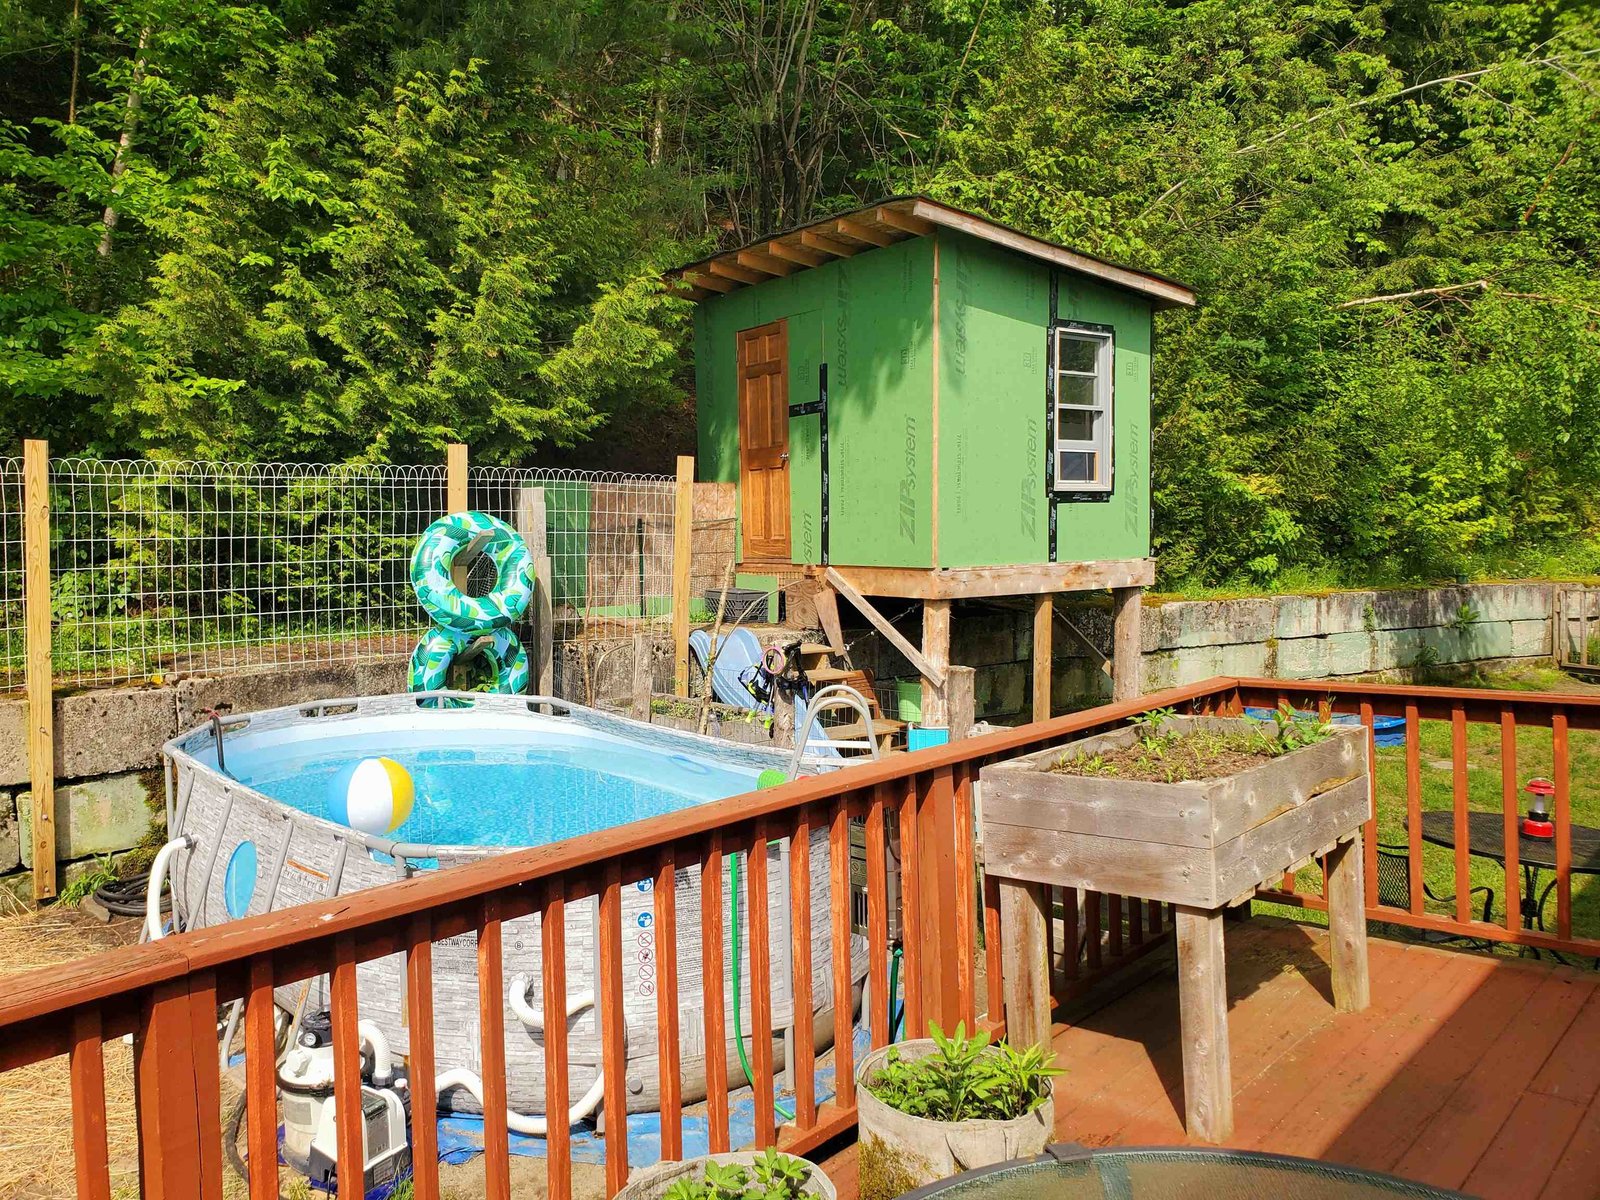 Play house and pool off back deck. Very private.